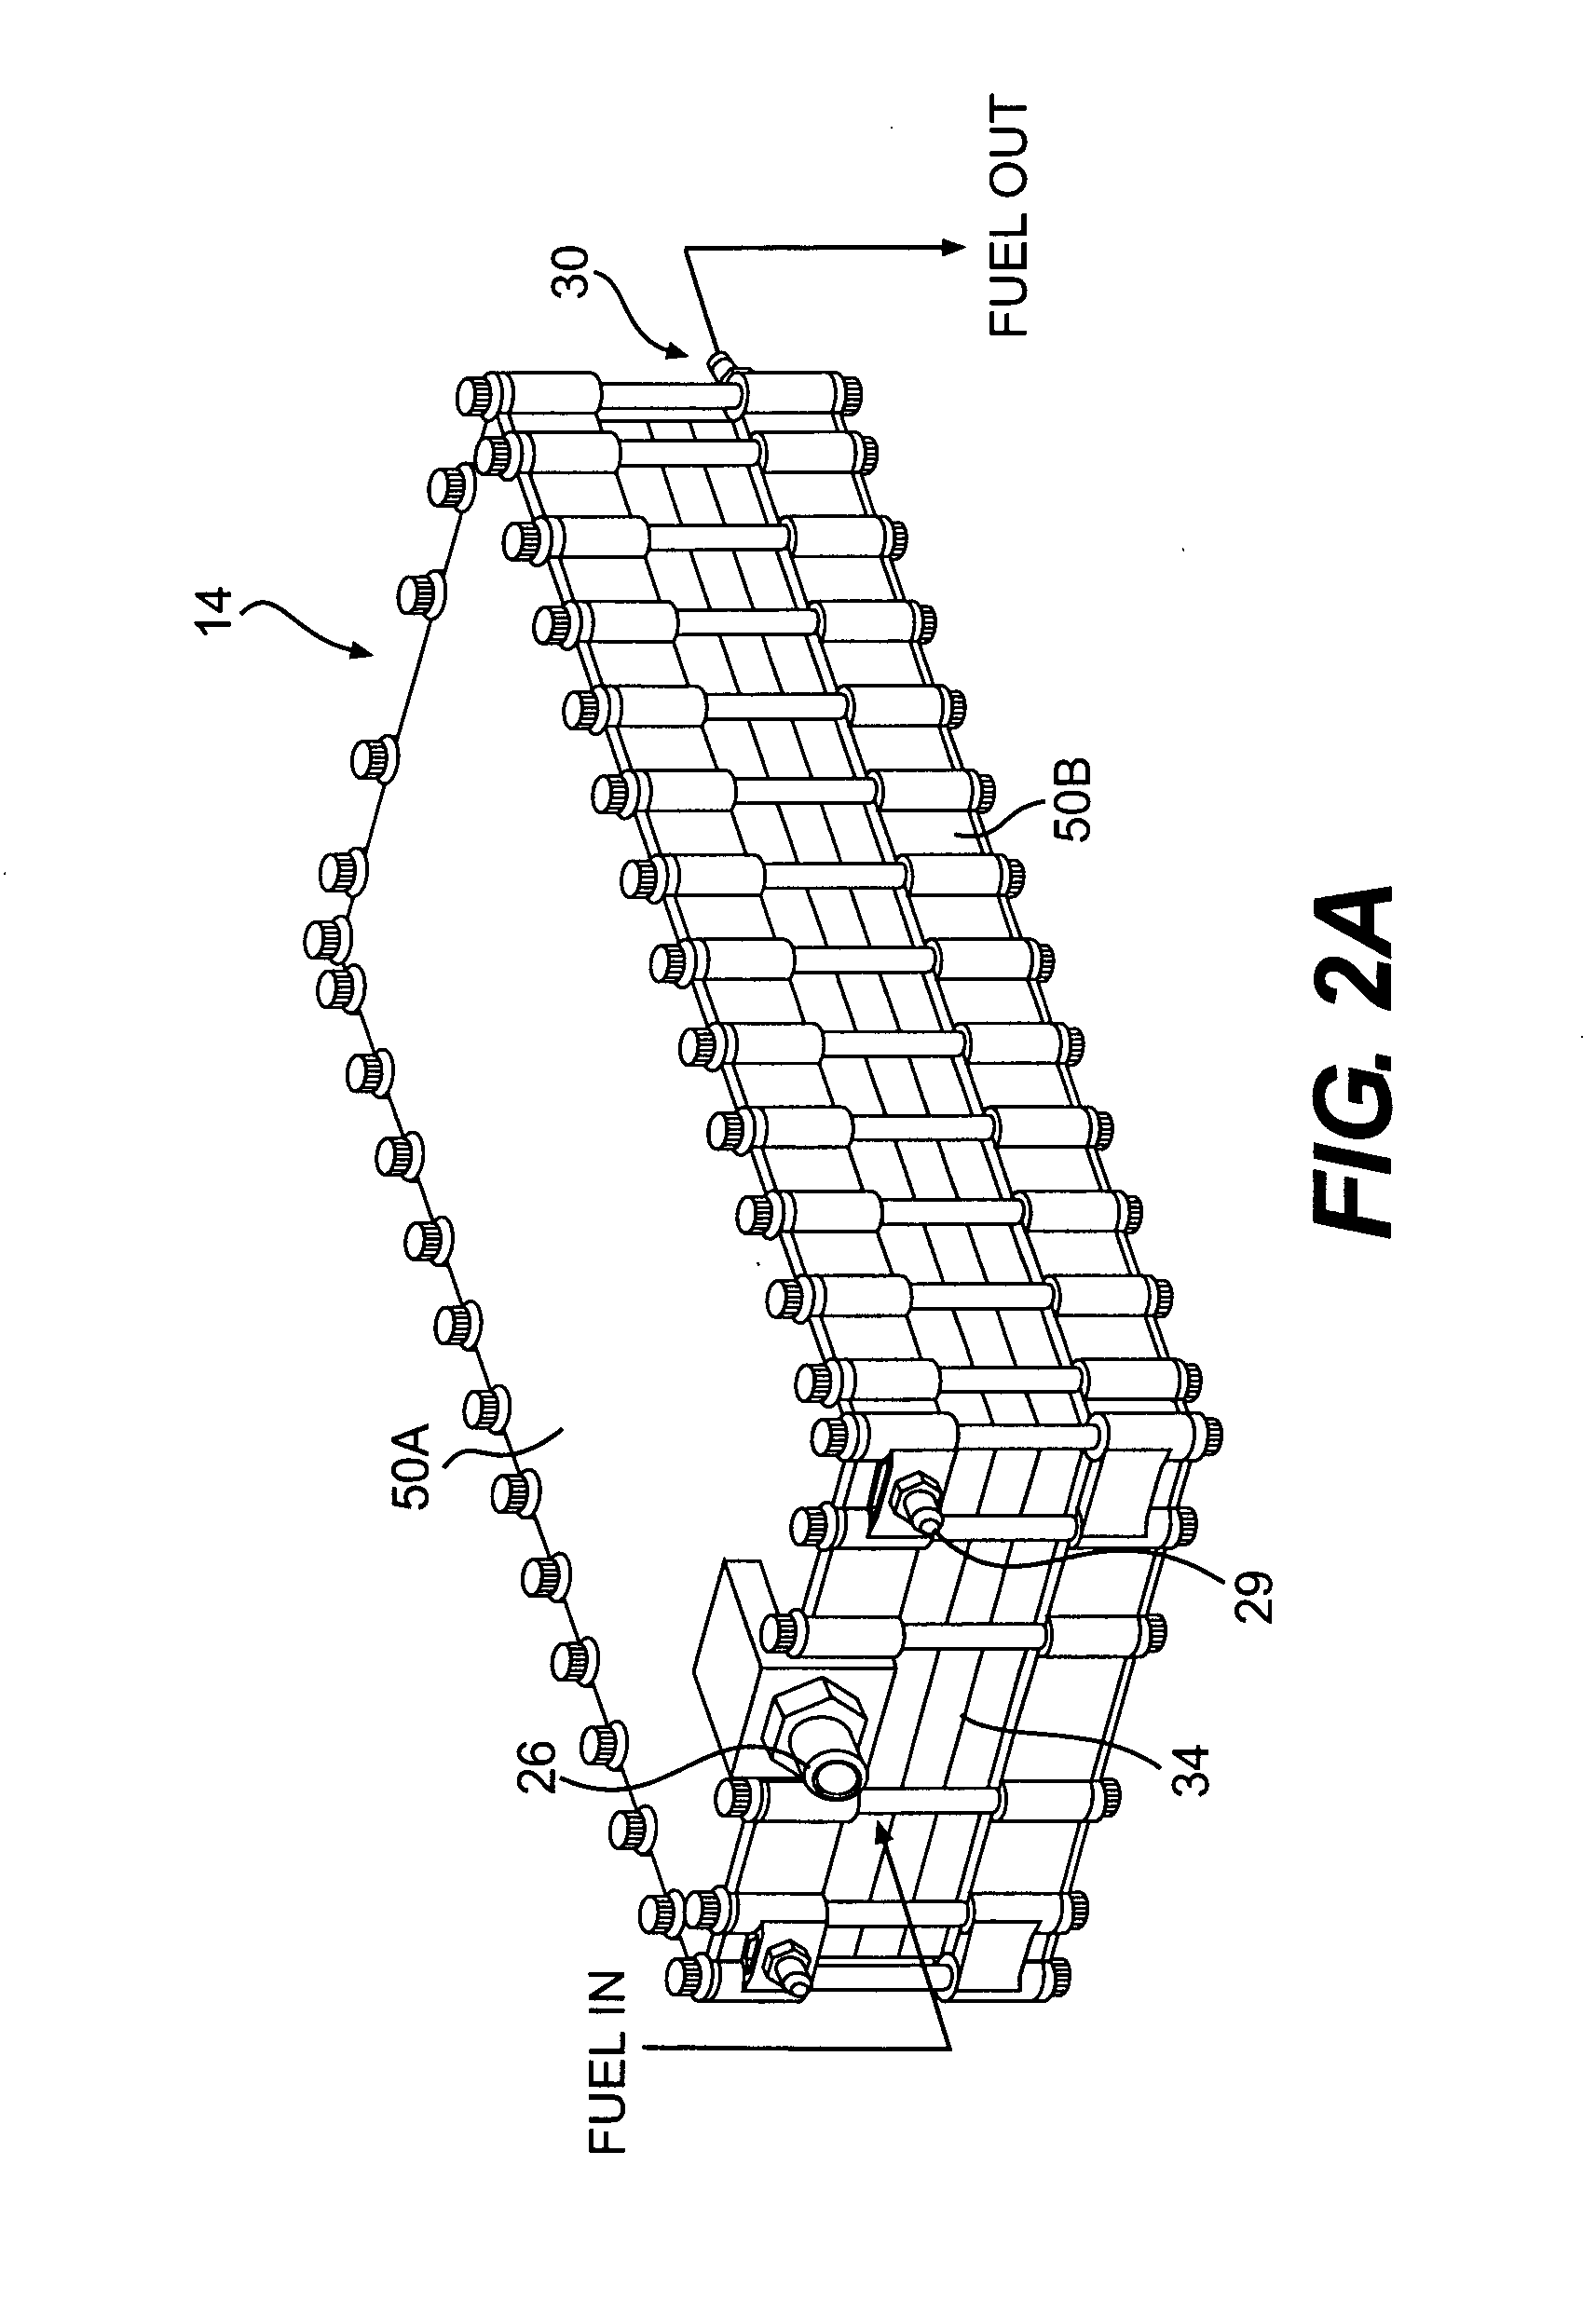 Method for enhancing mass transport in fuel deoxygenation systems